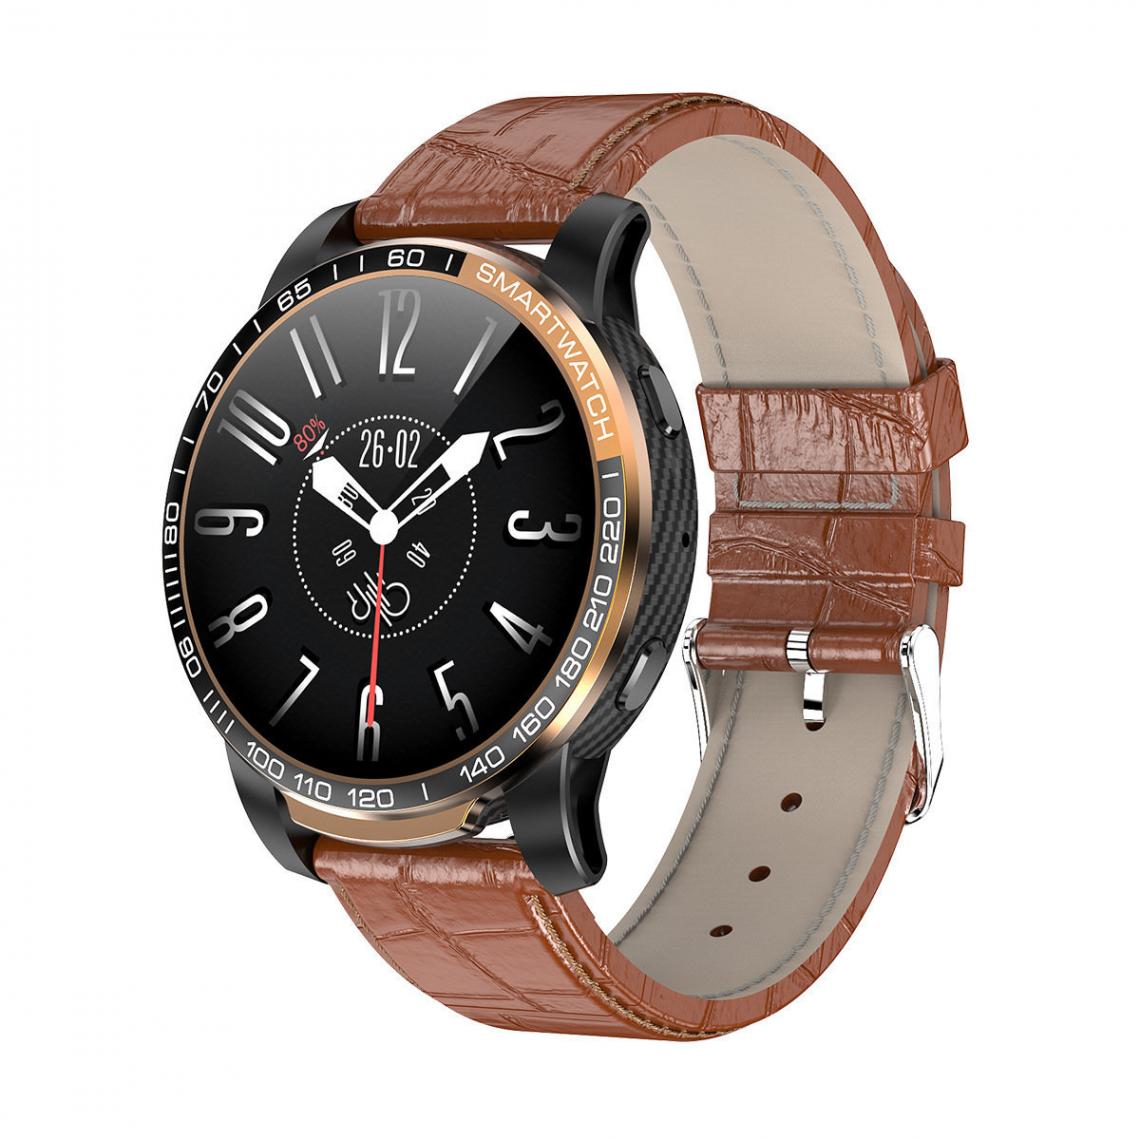 Chronotech Montres - Chronus F7 bluetooth call Smart Watch with blood pressure, 24-hour heart rate monitoring, multi-mode training, Smart Watch for Android ios(Brown) - Montre connectée